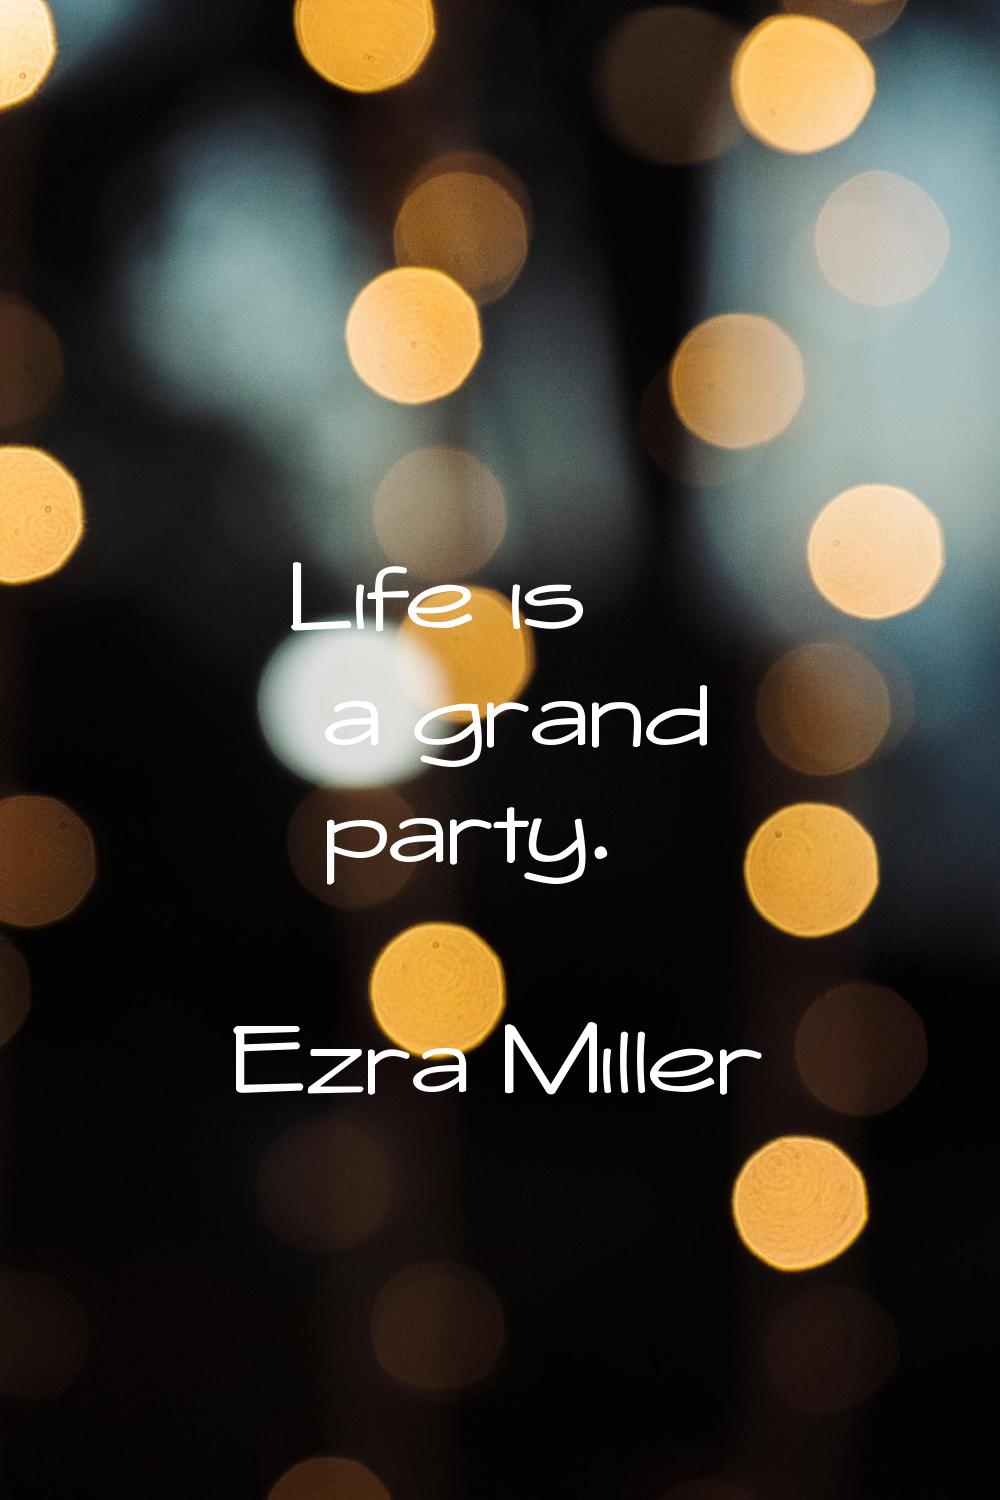 Life is a grand party.